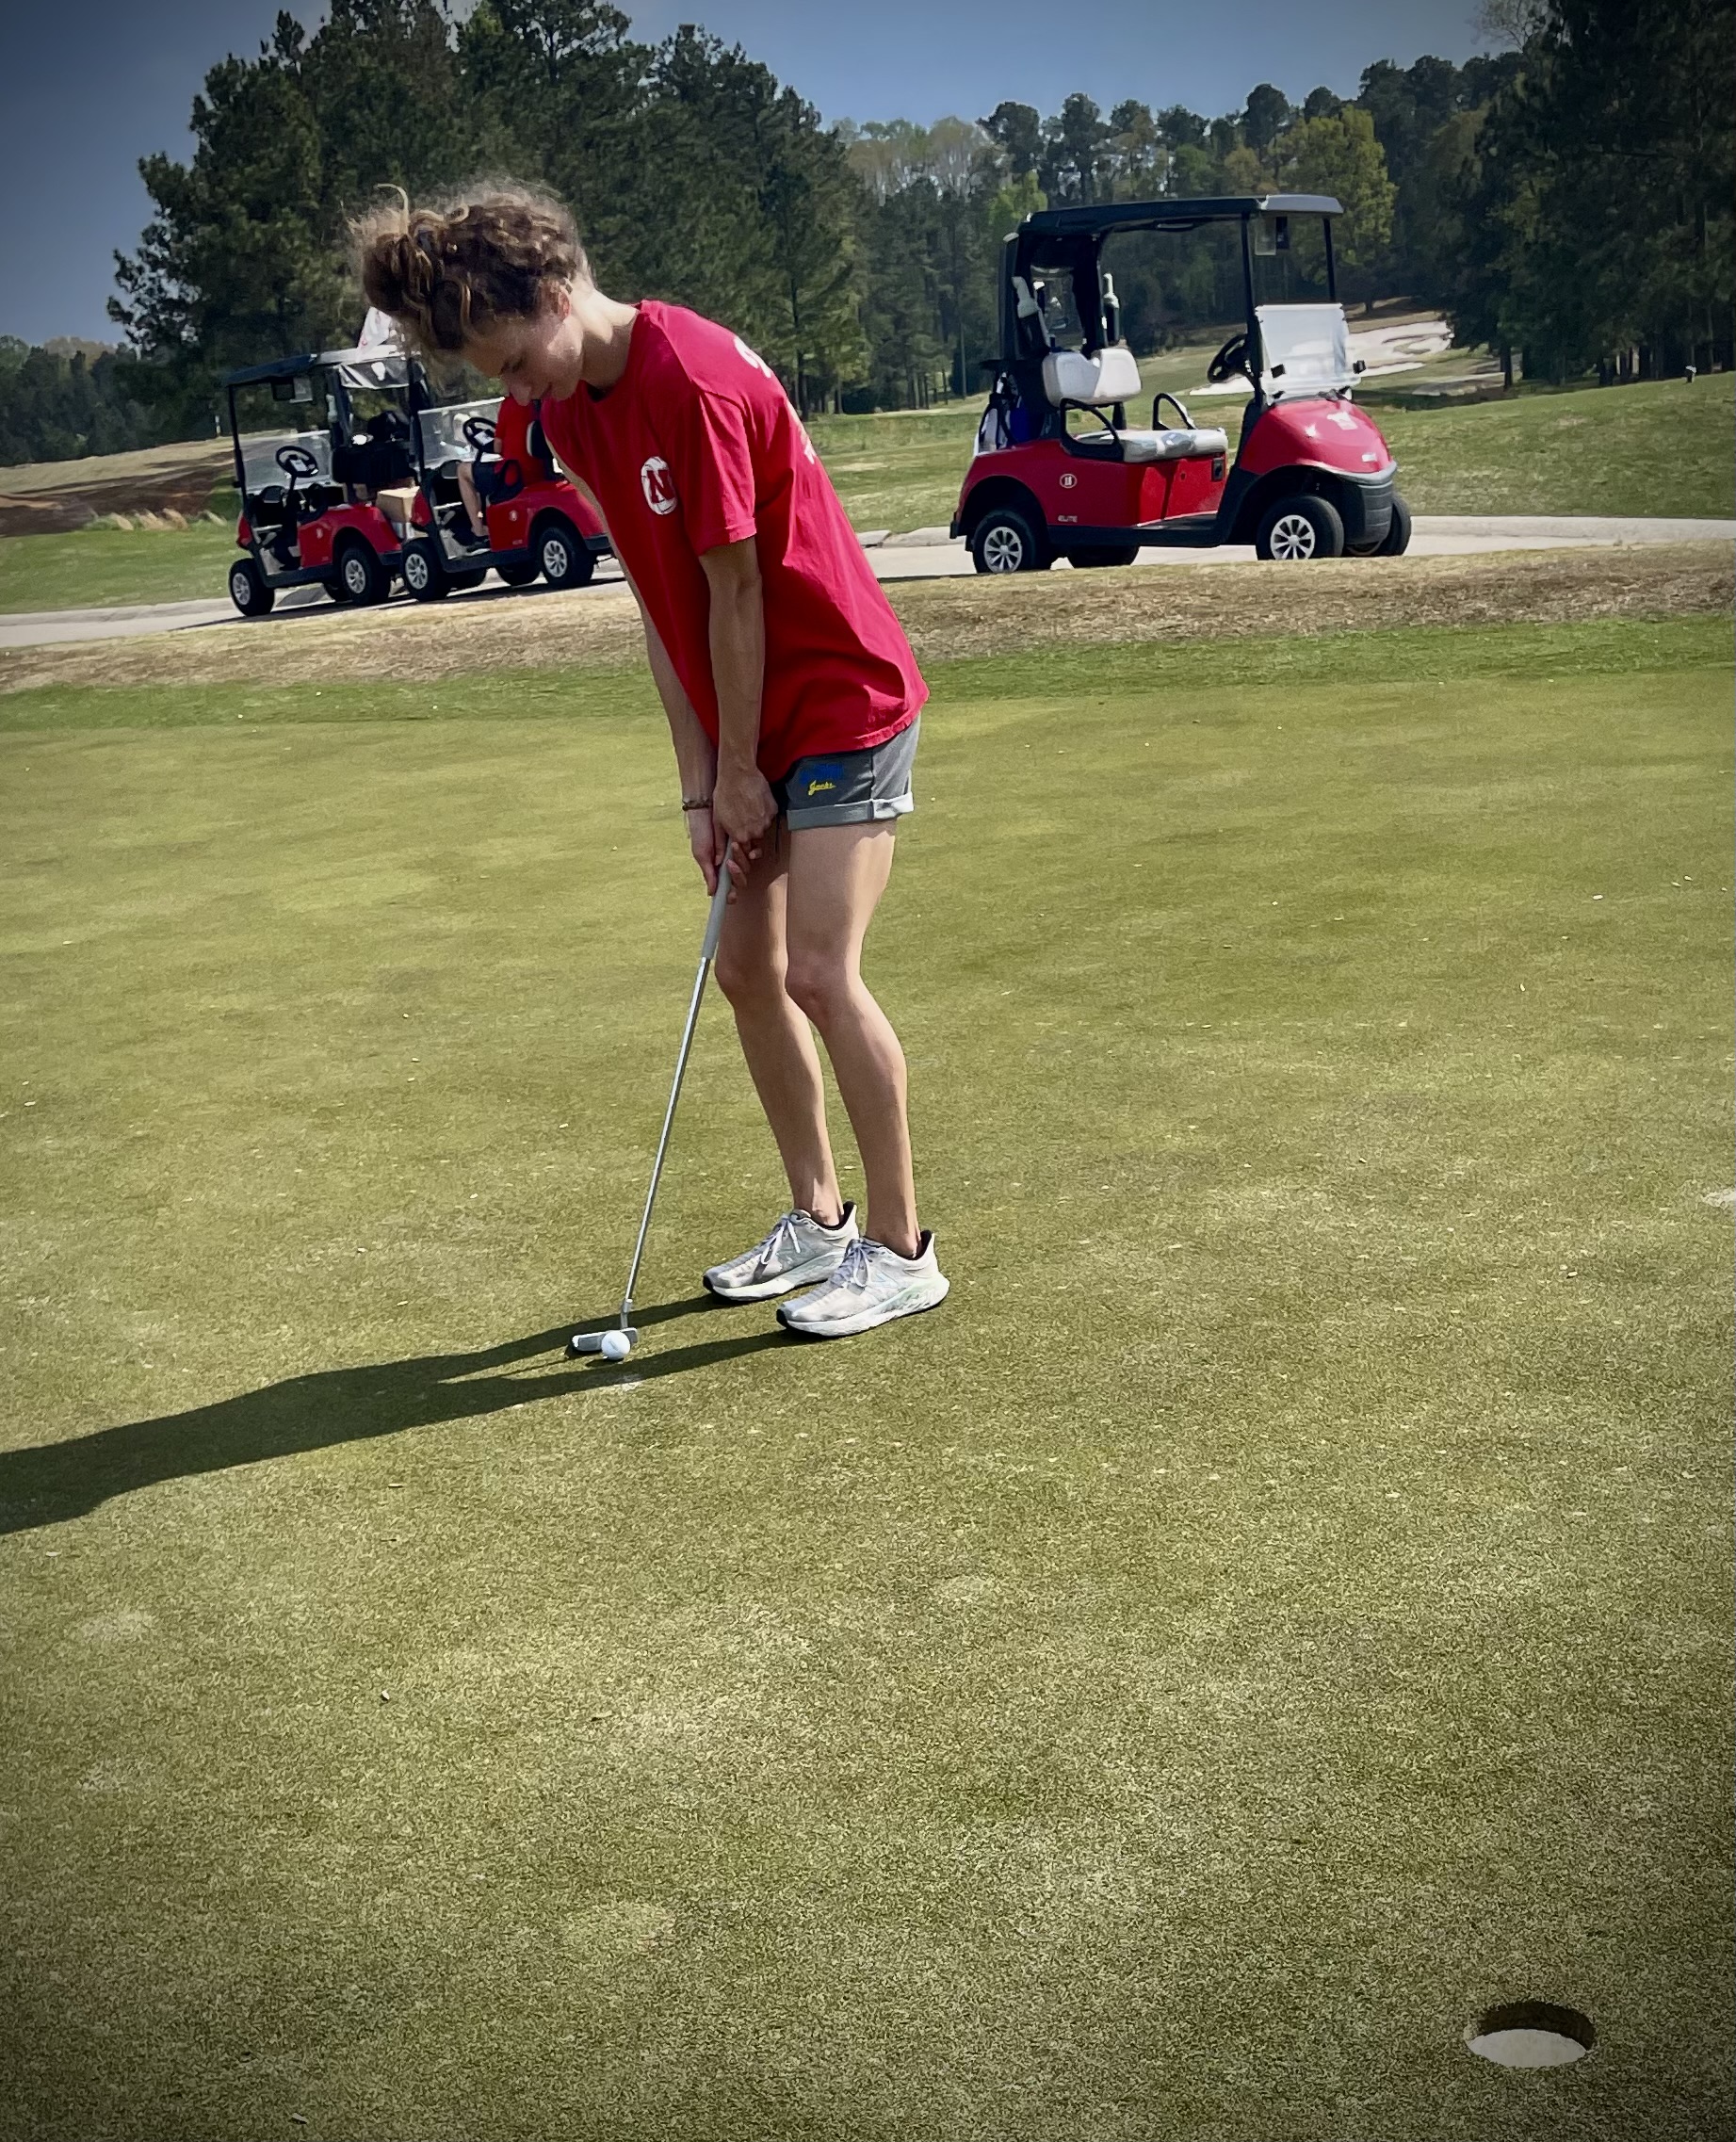 Brynna Bruxellas practices putting at a Grads to Golf event at the Lonnie Poole Golf Course